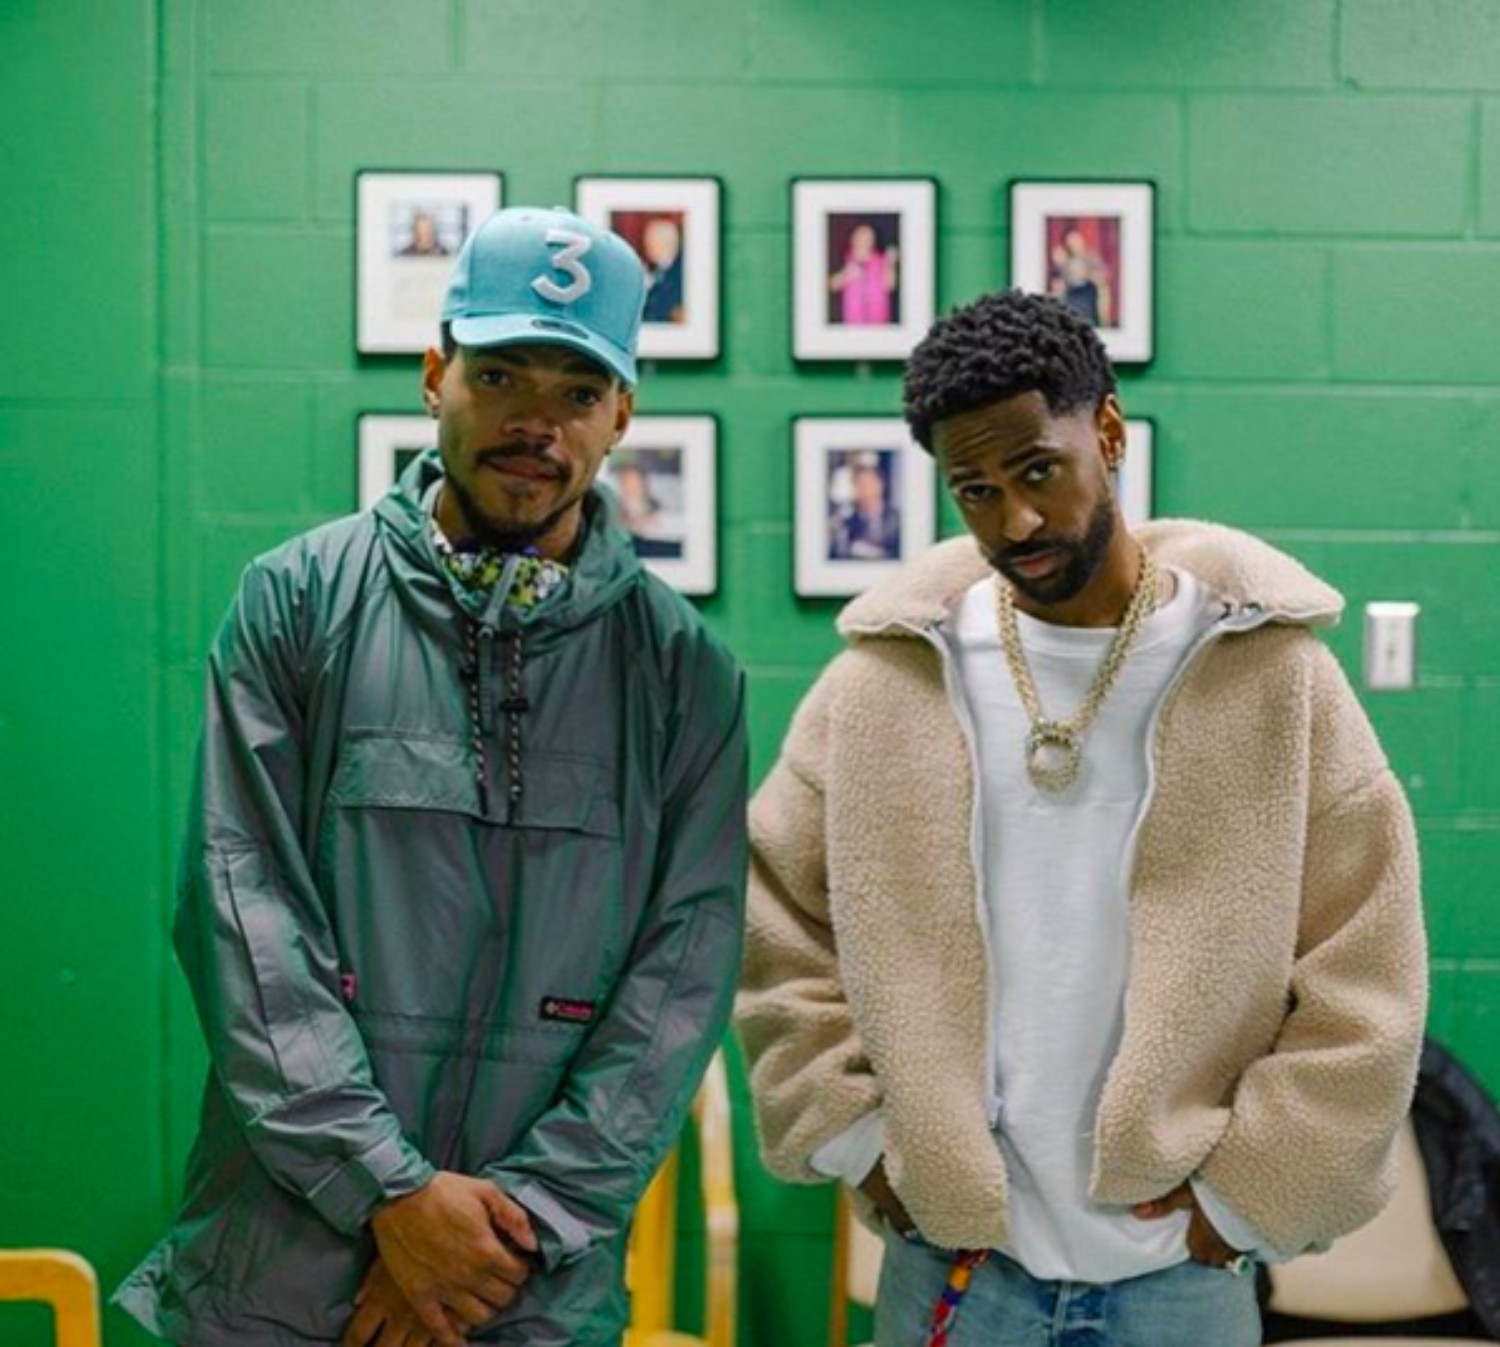 SPOTTED: Big Sean & Chance The Rapper in Skodia and Columbia x Opening Ceremony